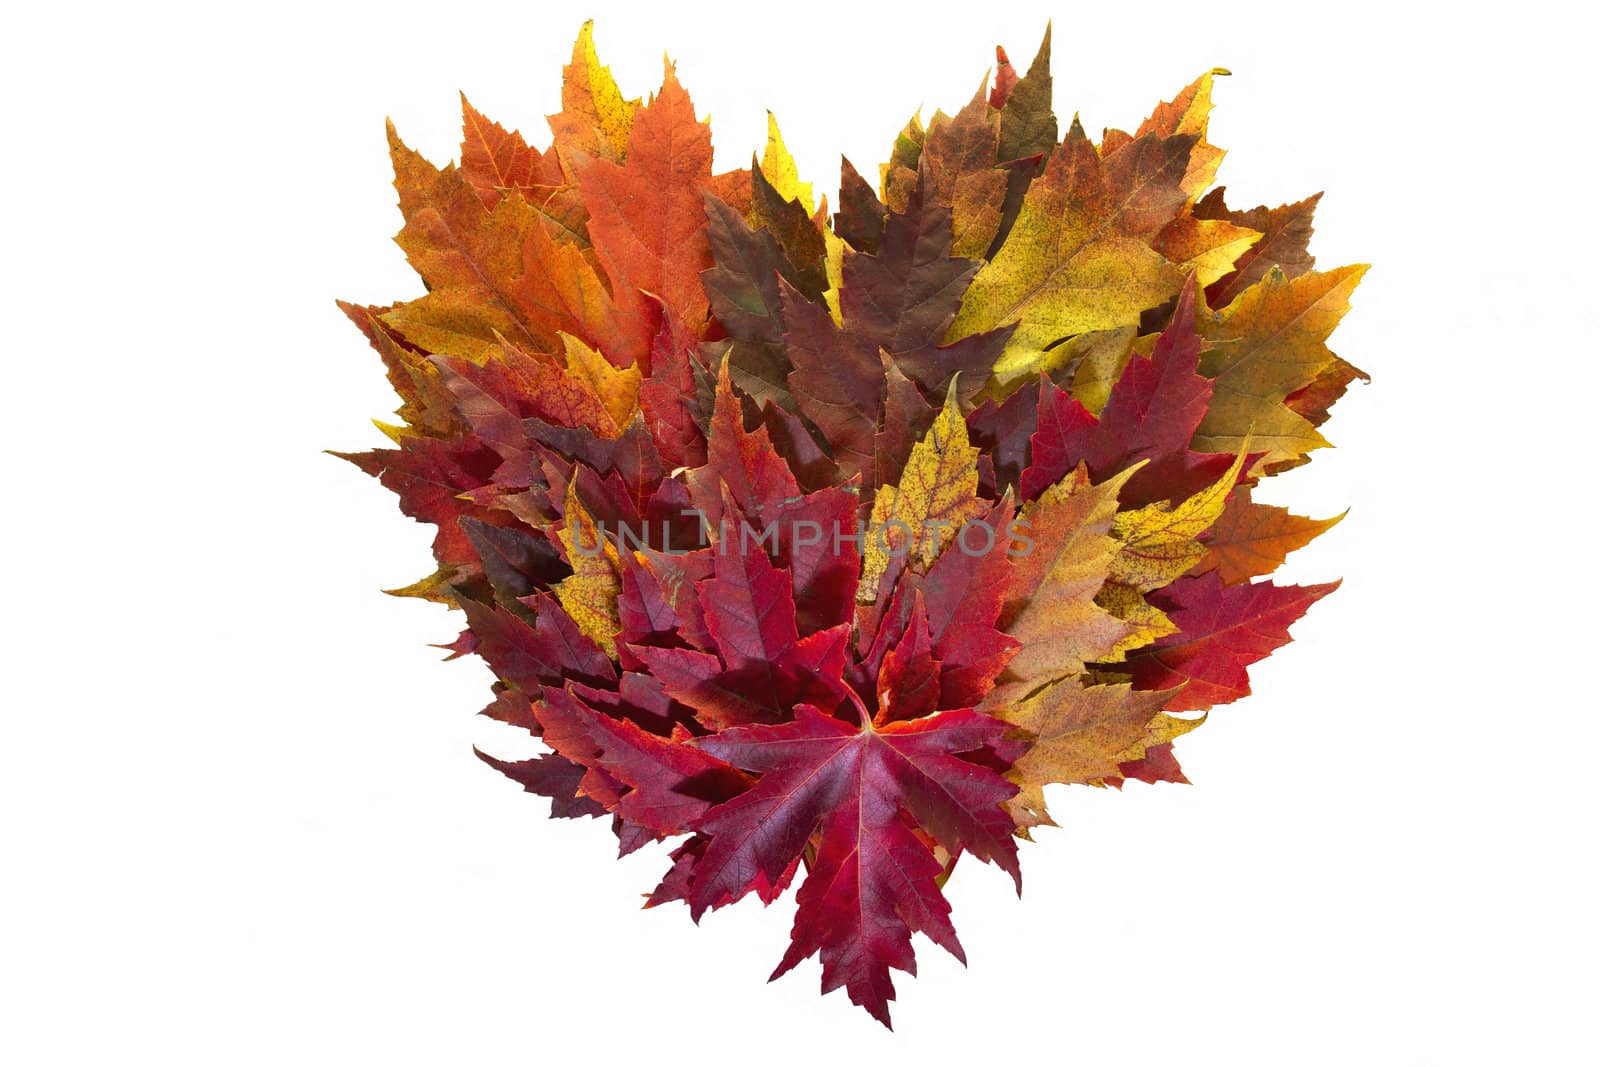 Maple Leaves Mixed Fall Colors Heart Wreath by Davidgn